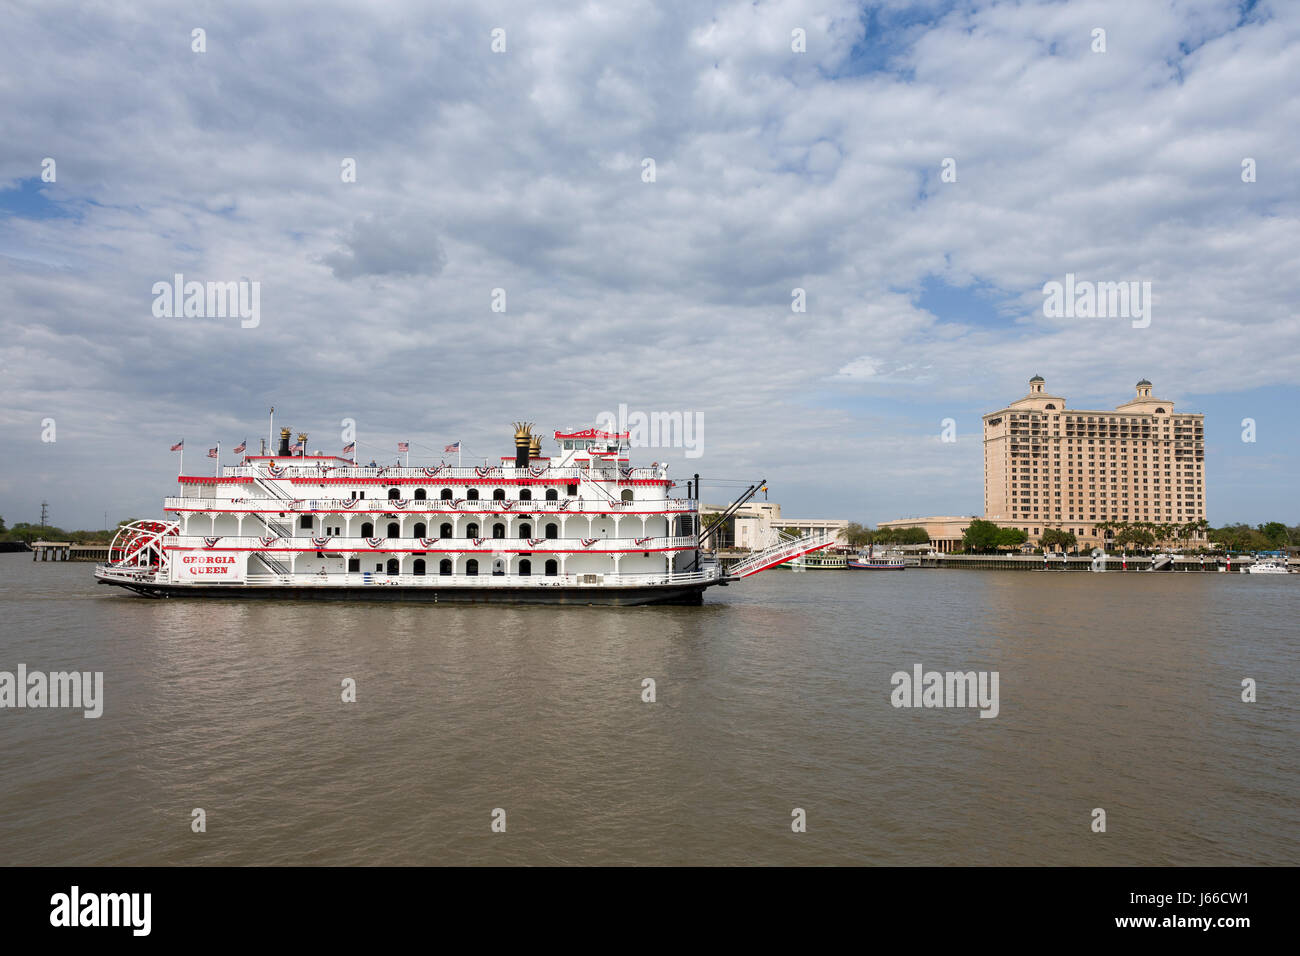 Savannah, GA - March 27, 2017:  The Georgia Queen is an 1800s style paddlewheel riverboat and tourist attraction in historic Savannah, Georgia. Stock Photo